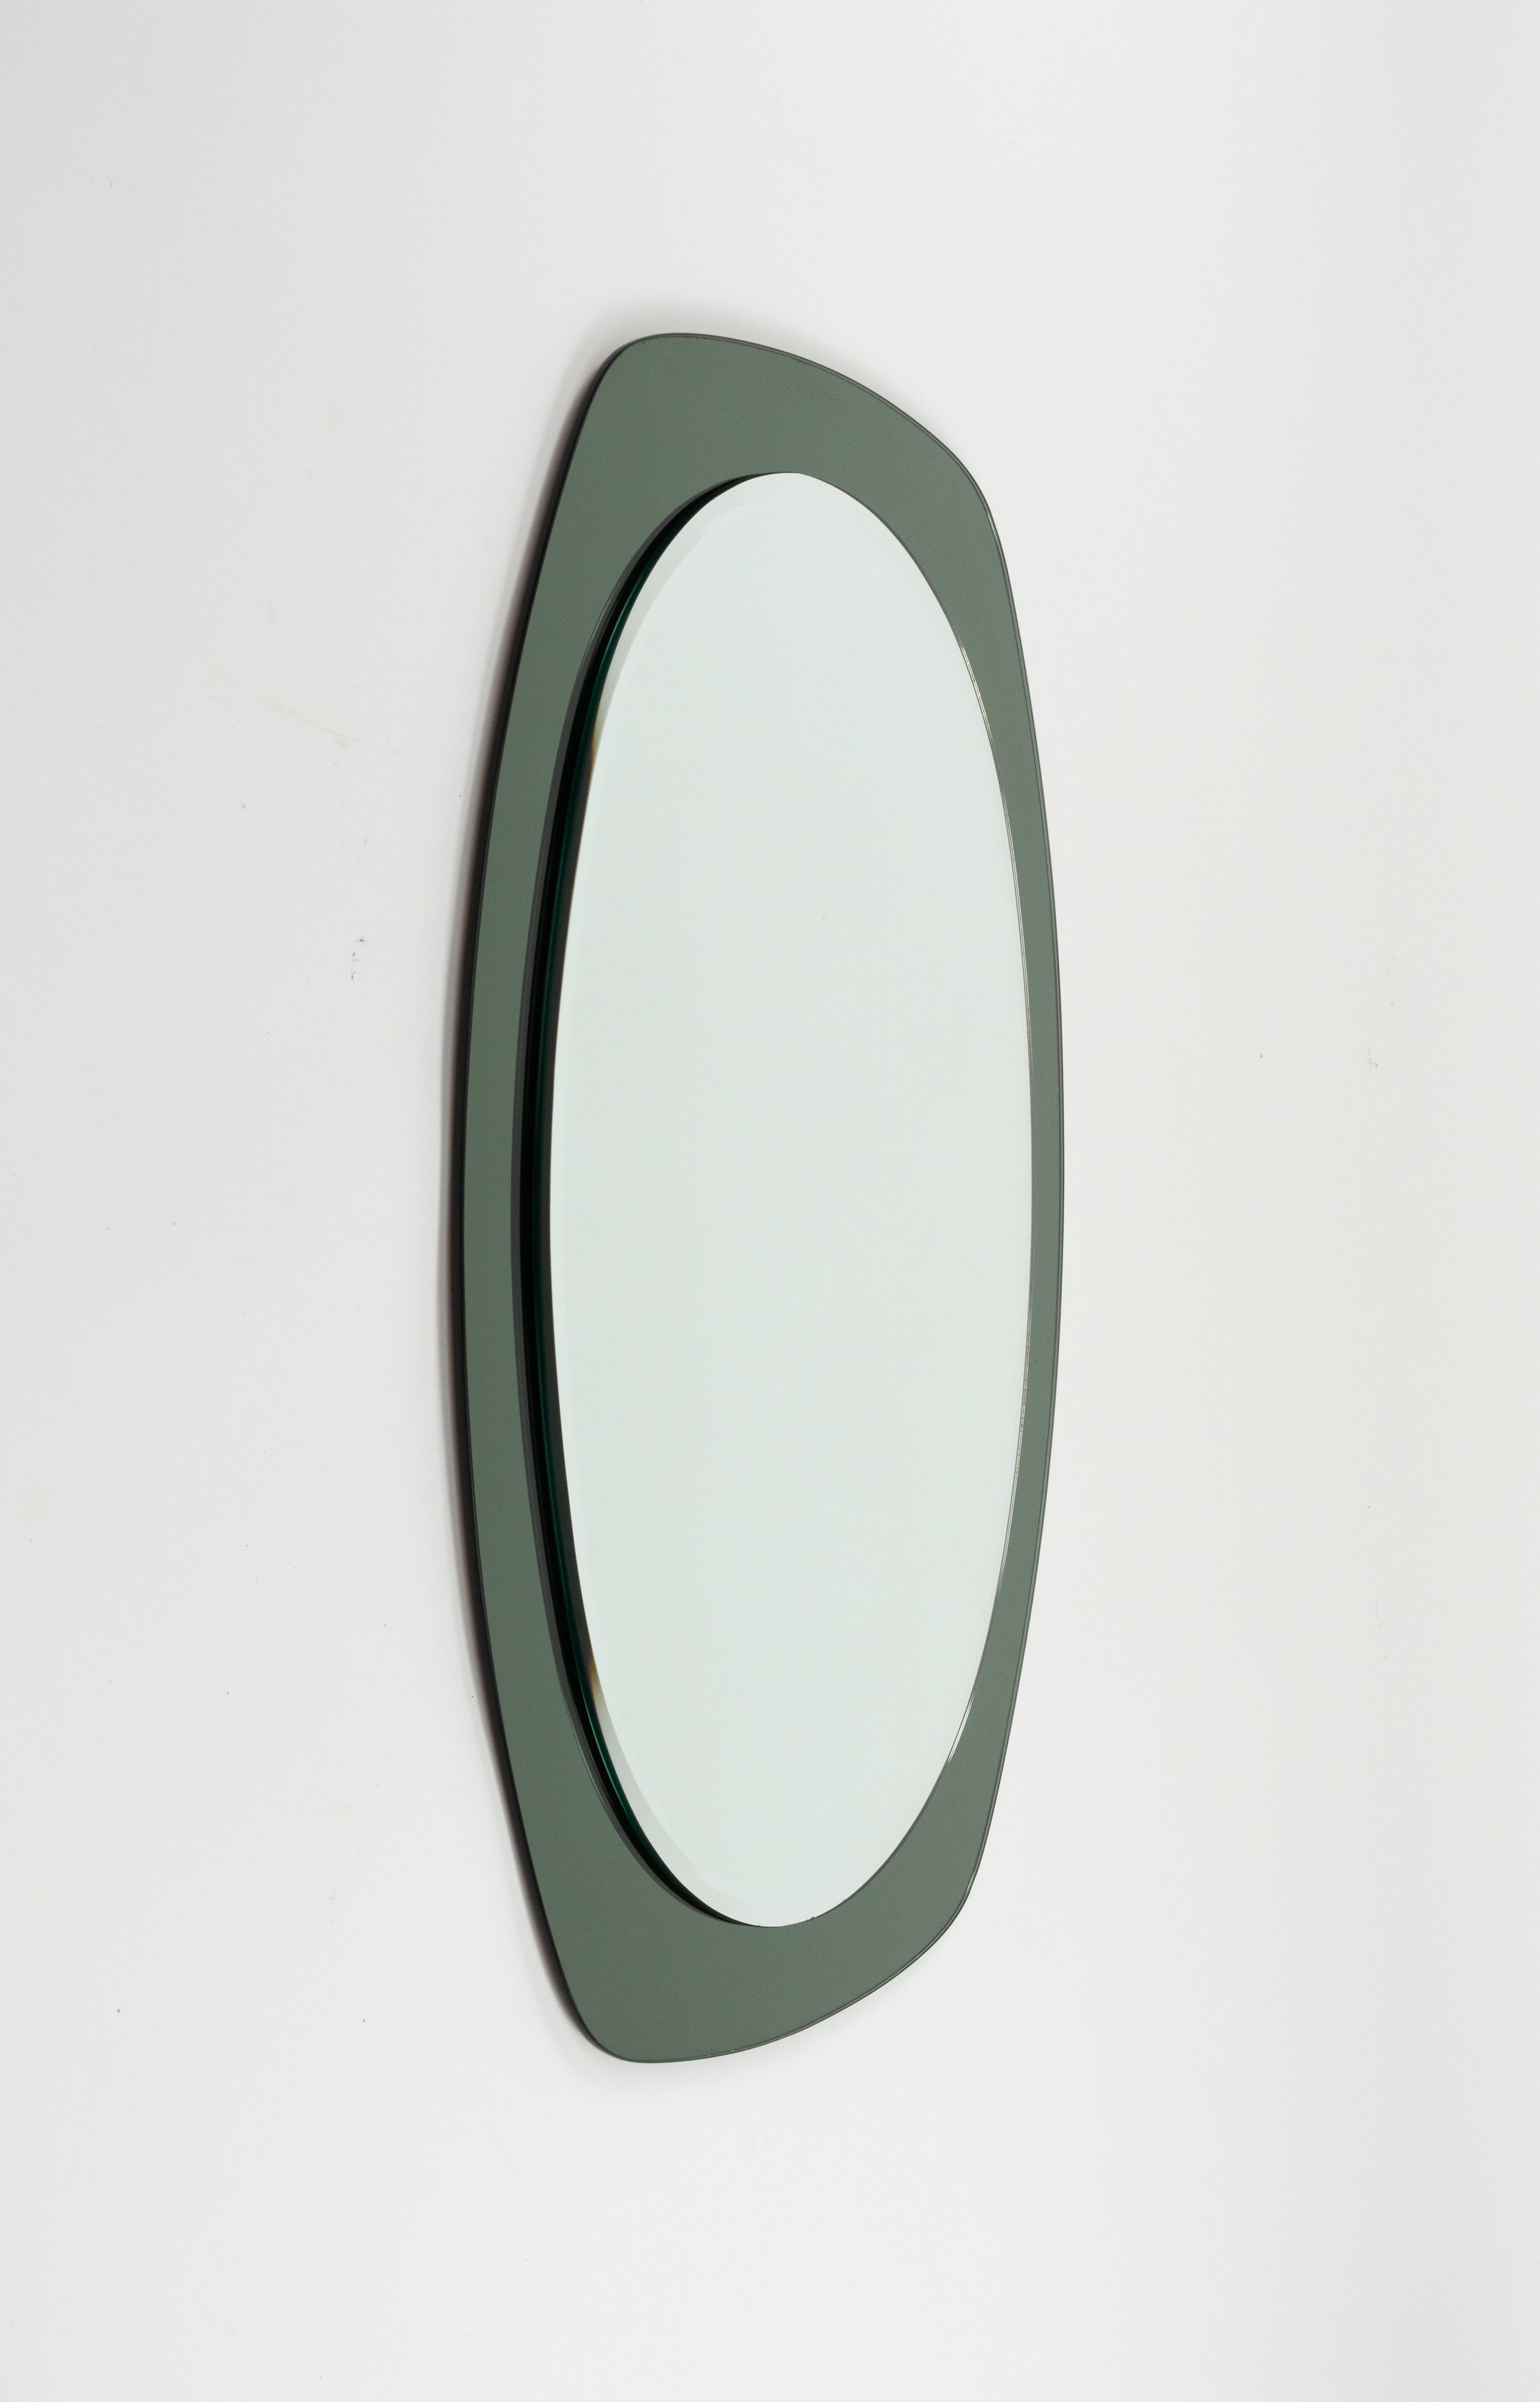 Metal Midcentury Cristal Art Oval Wall Mirror with Green Frame, Italy 1960s For Sale